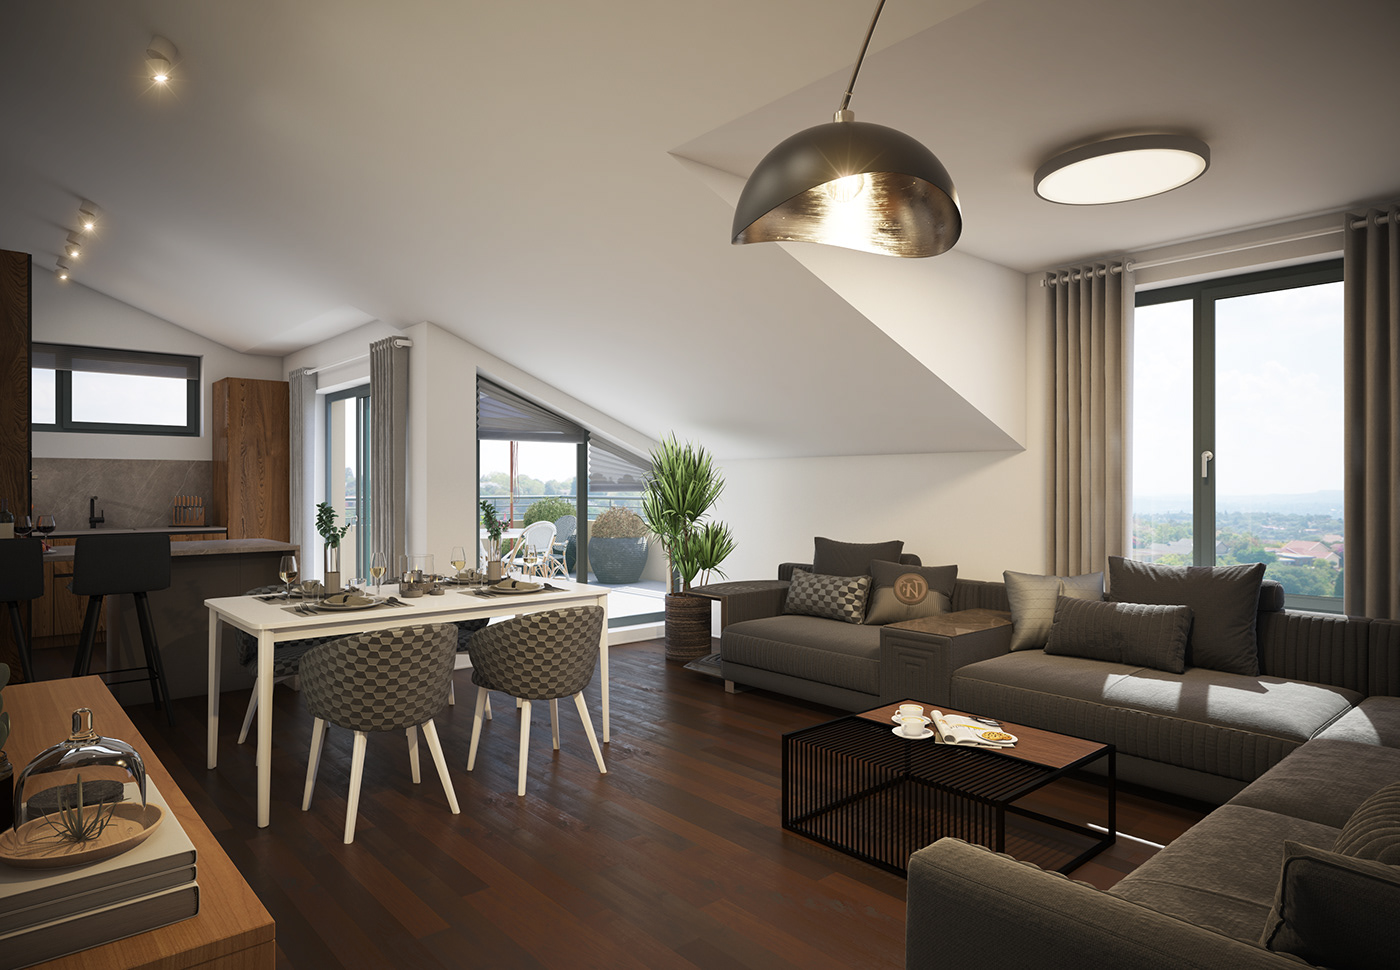 building germany house residential 3D 3dmax modeling Render V-ray visualization